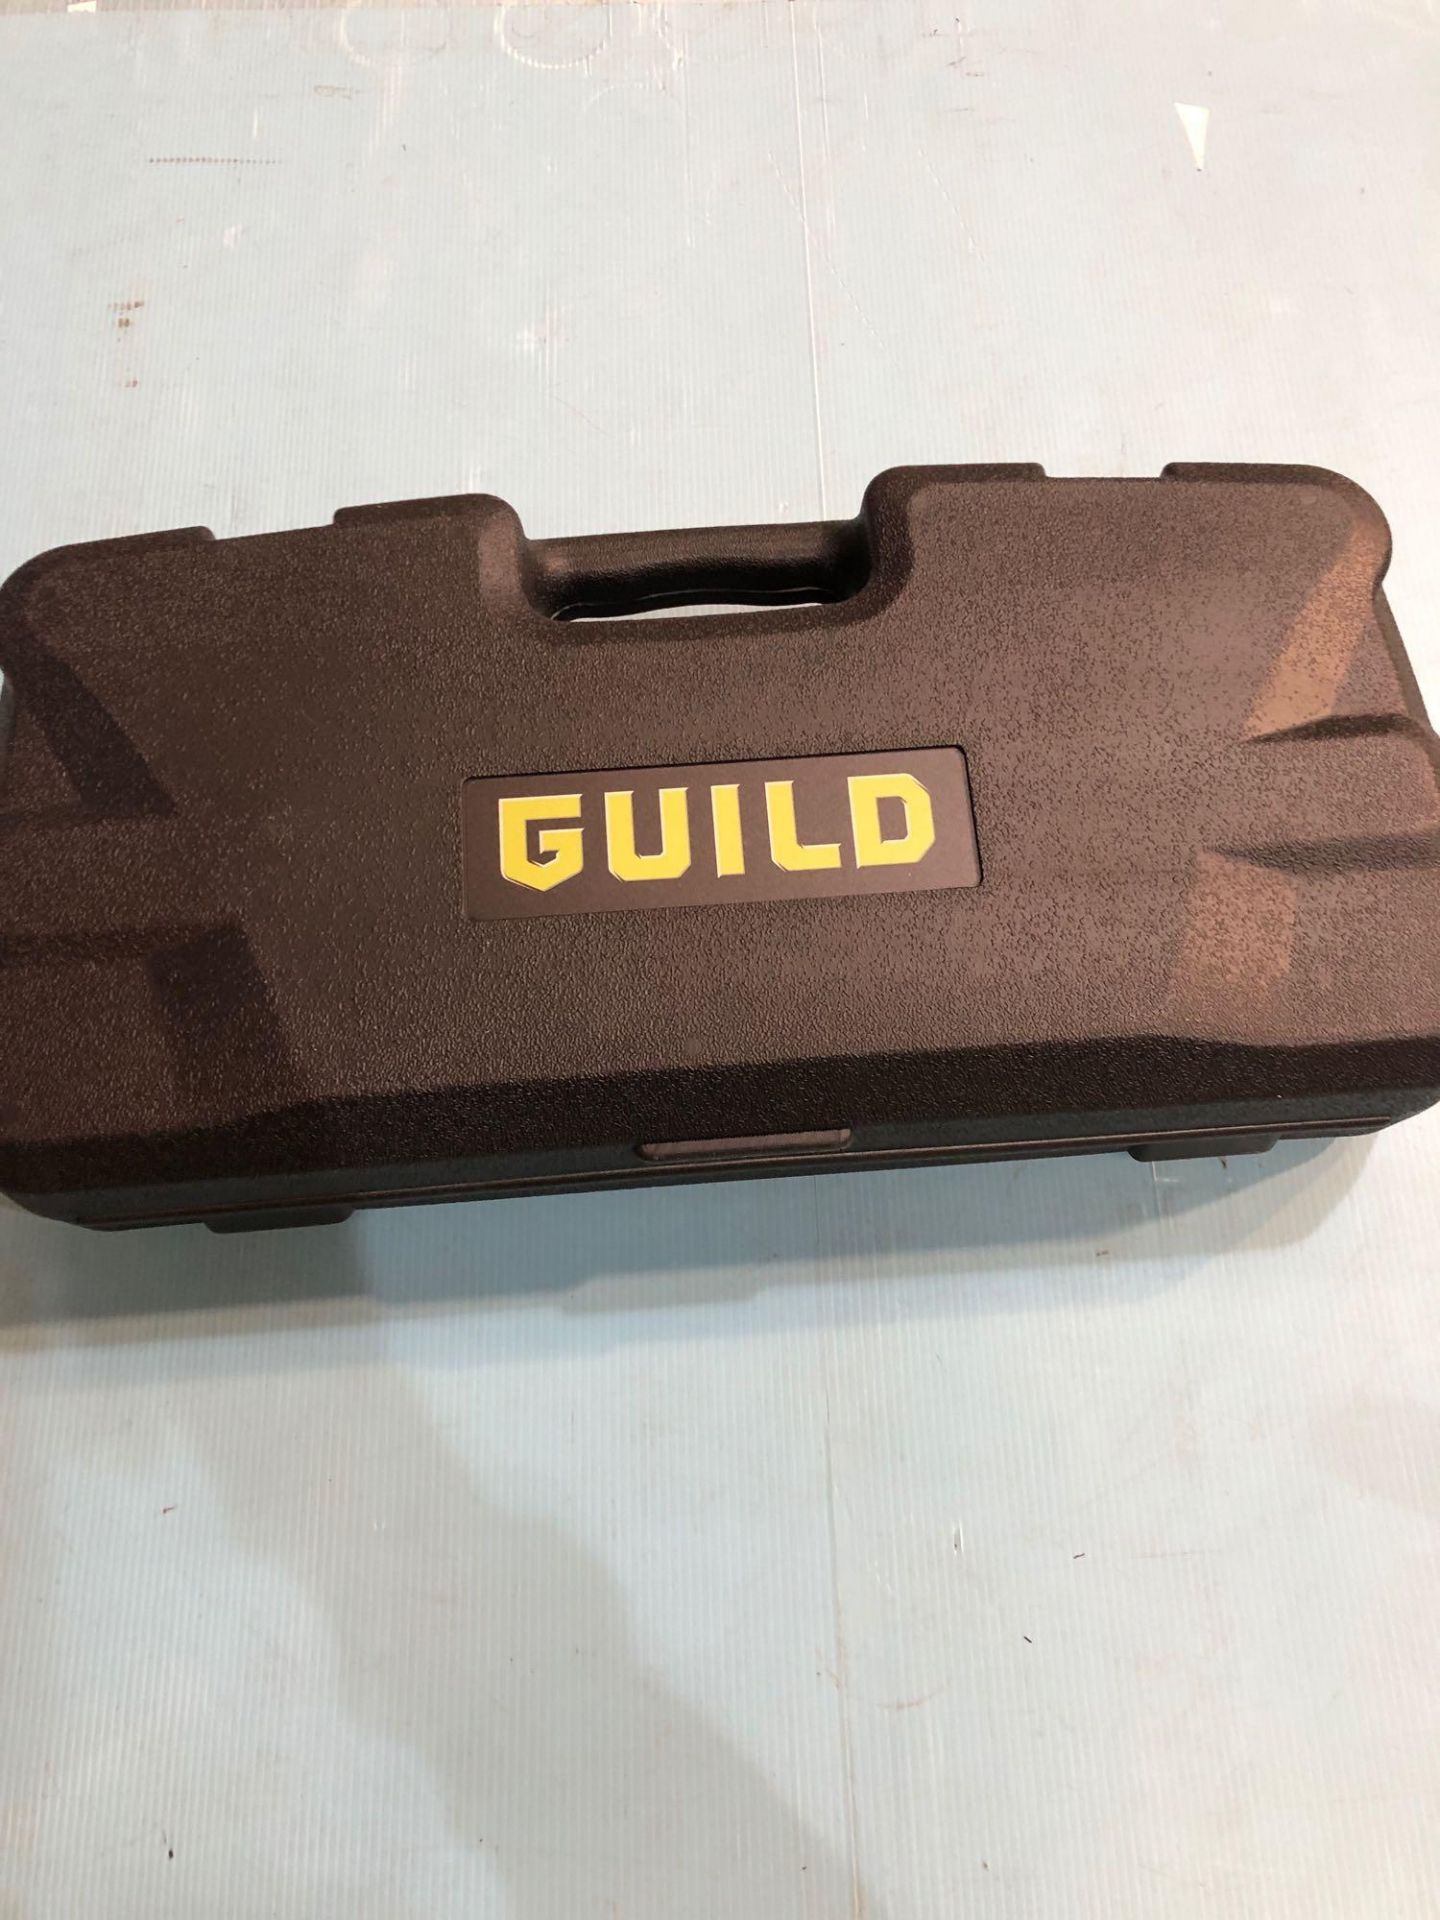 Guild Reciprocating Saw - 800W 481/3011 £50.00 RRP - Image 3 of 6